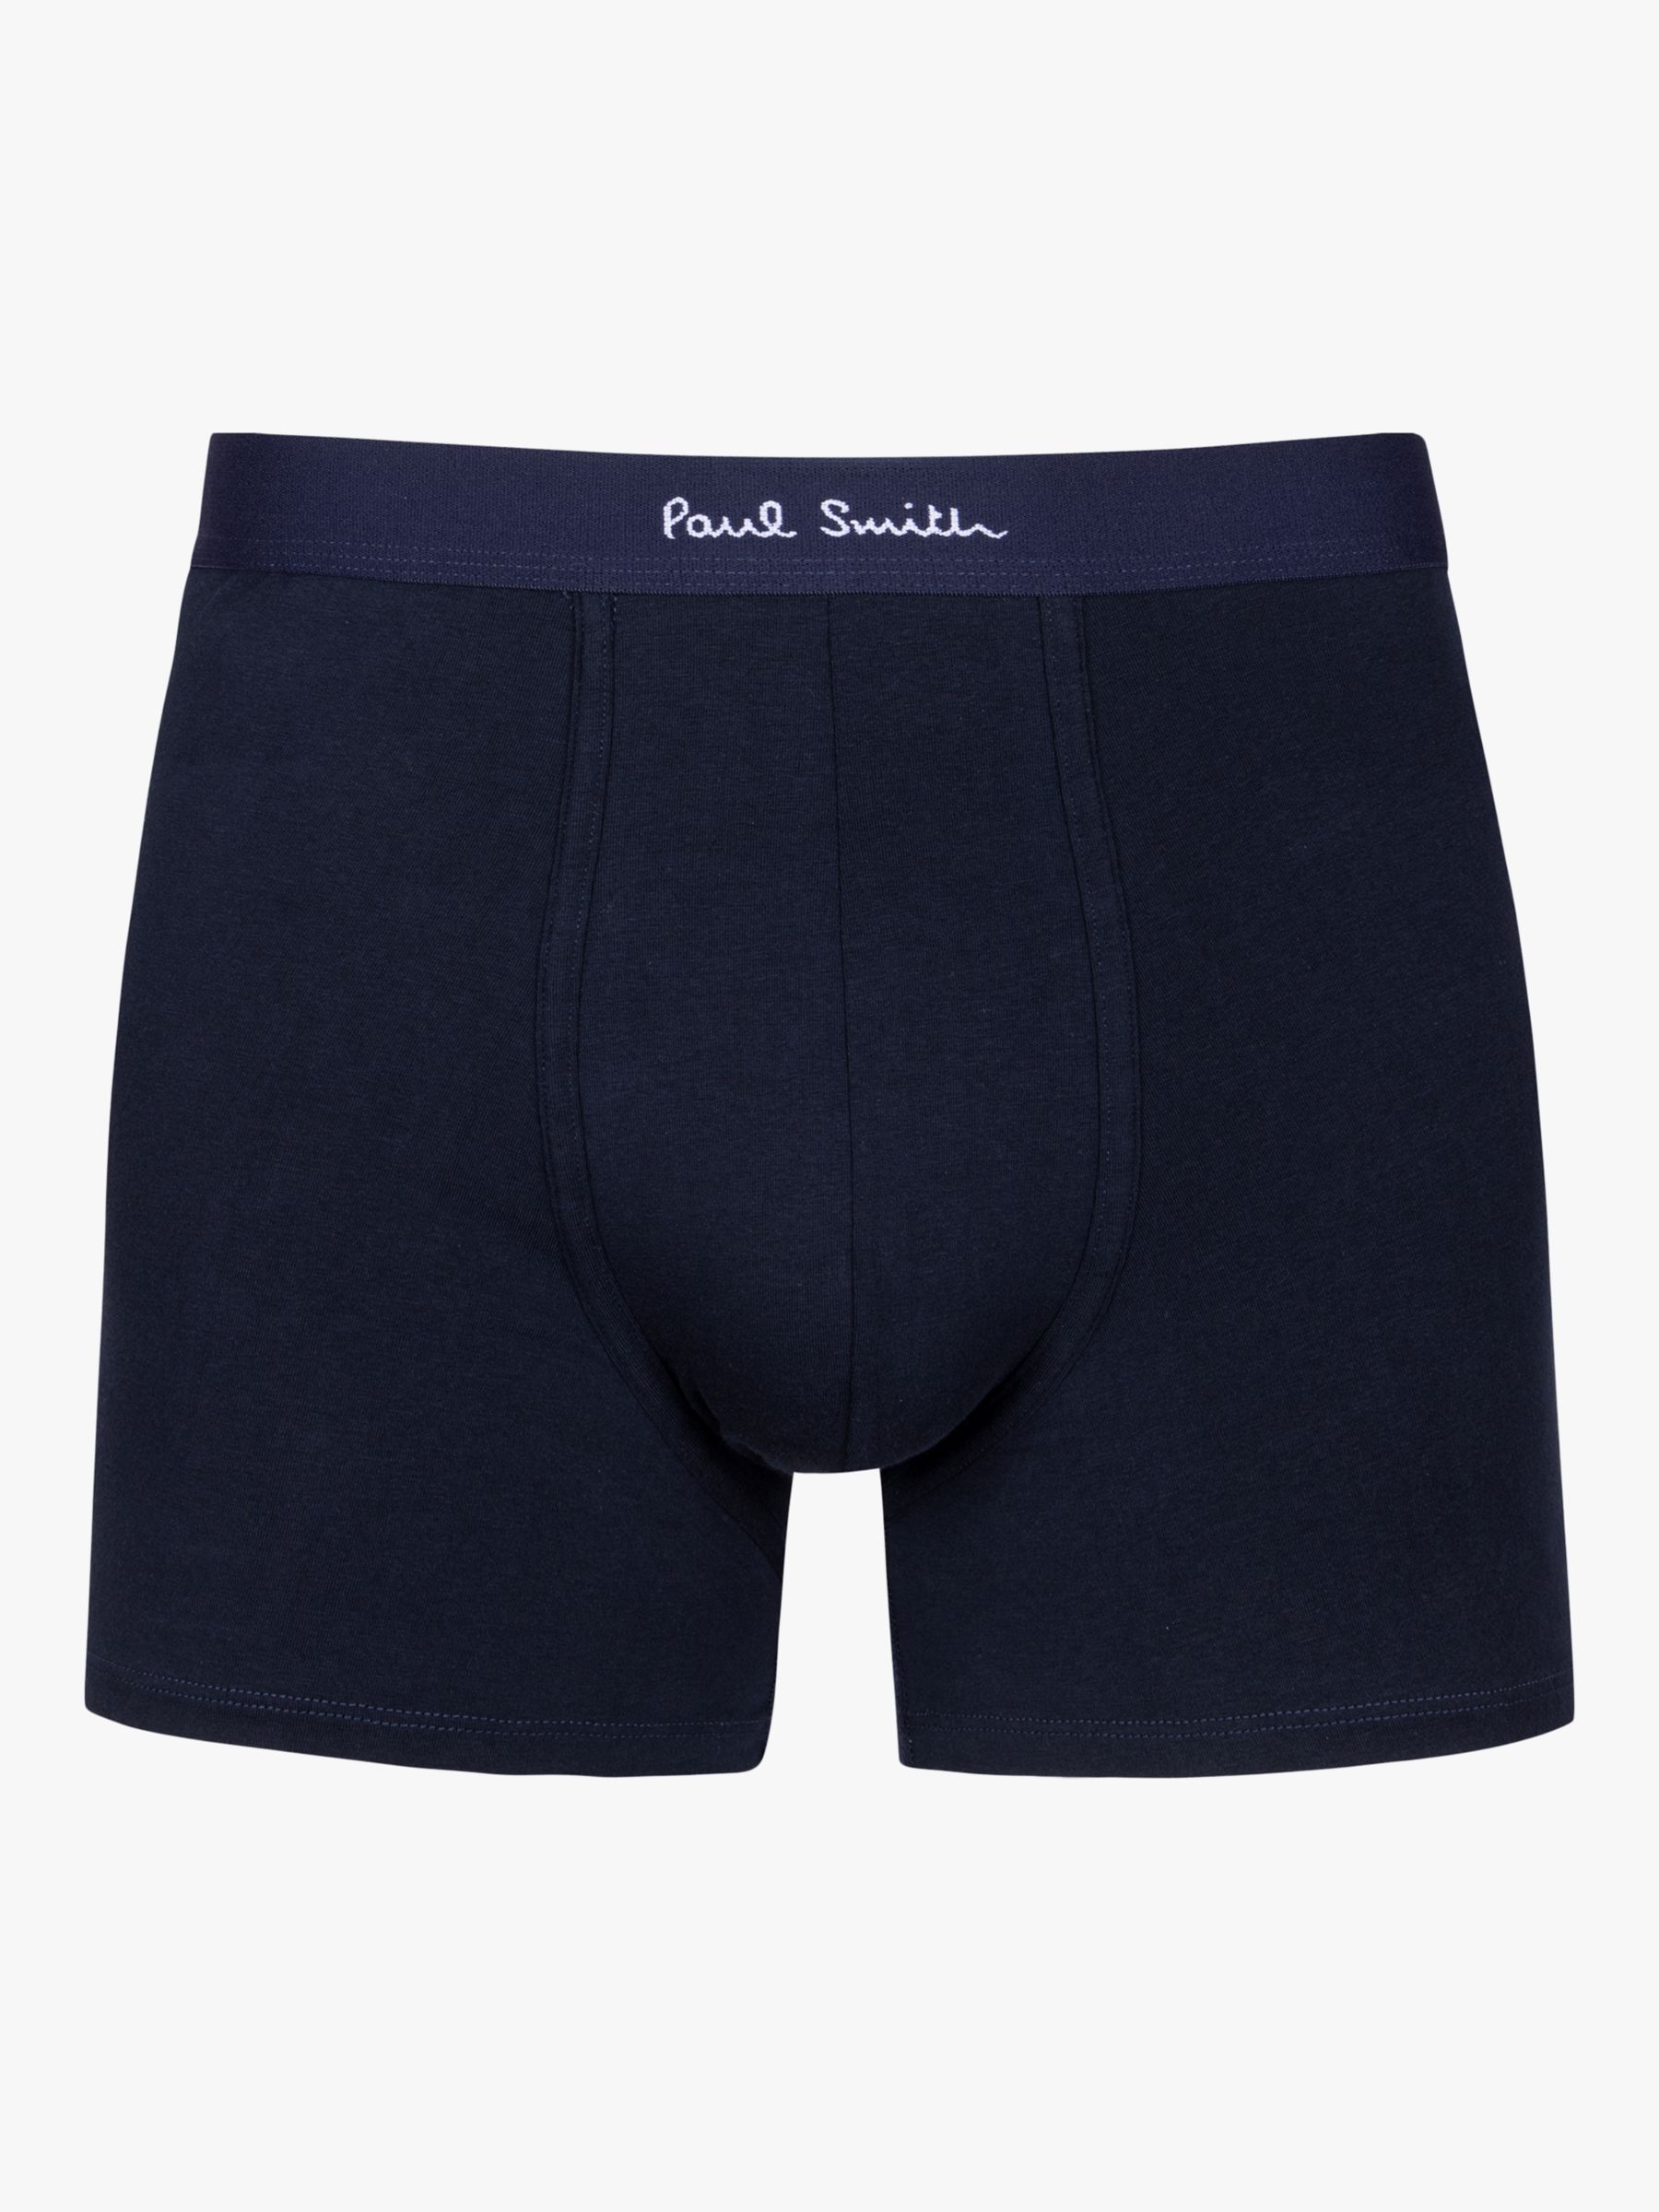 Paul Smith Organic Cotton Long Trunks, Pack of 3, Navy at John Lewis ...